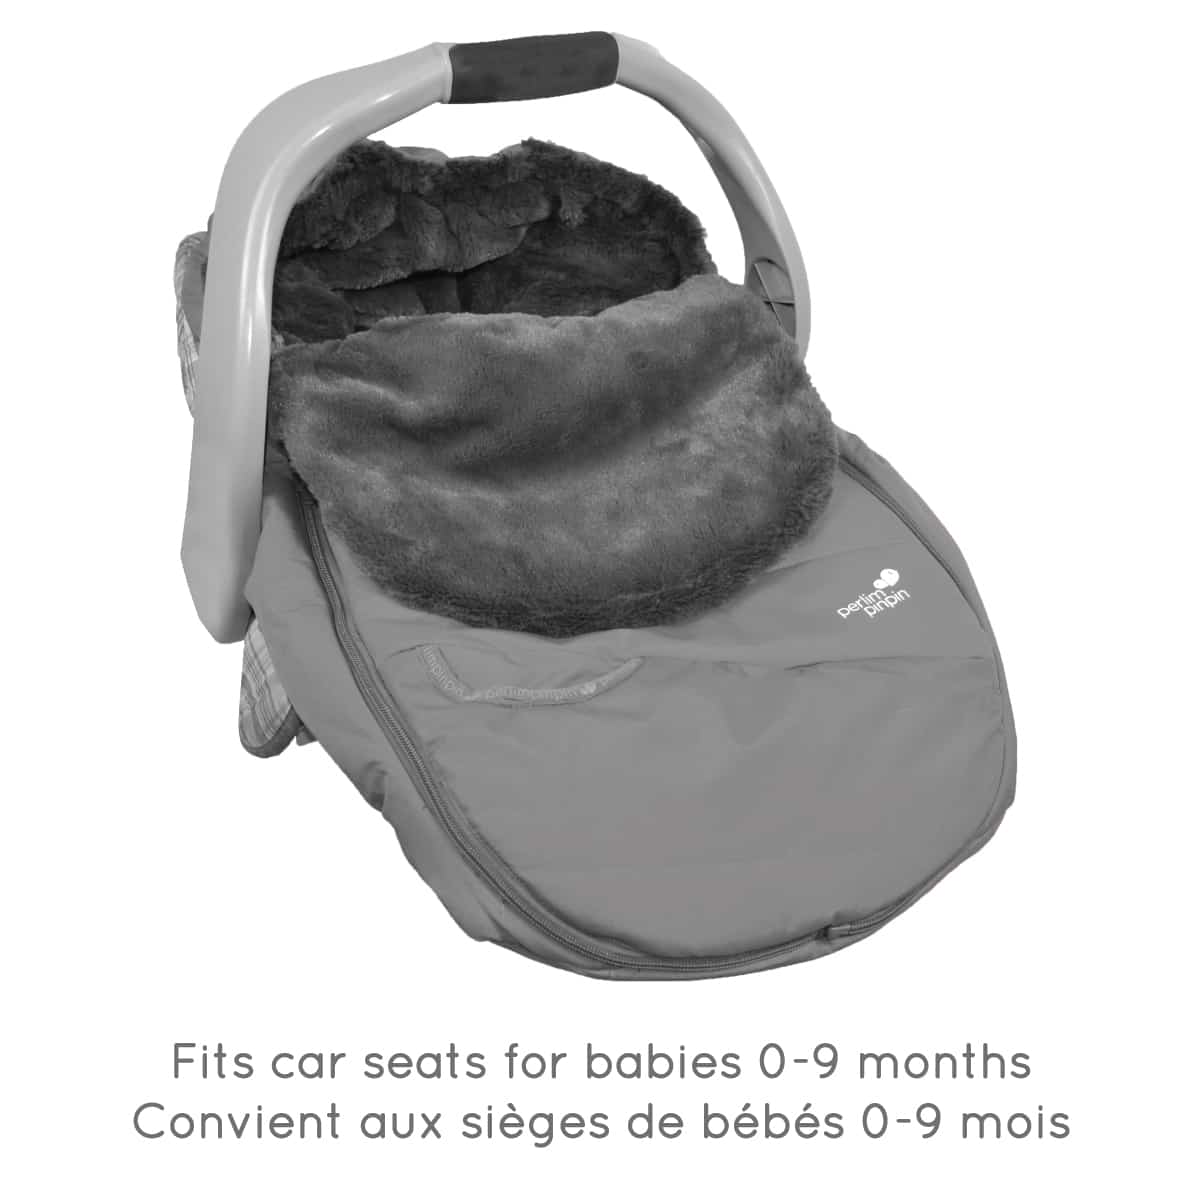 Baby car seat cover for winter - Black